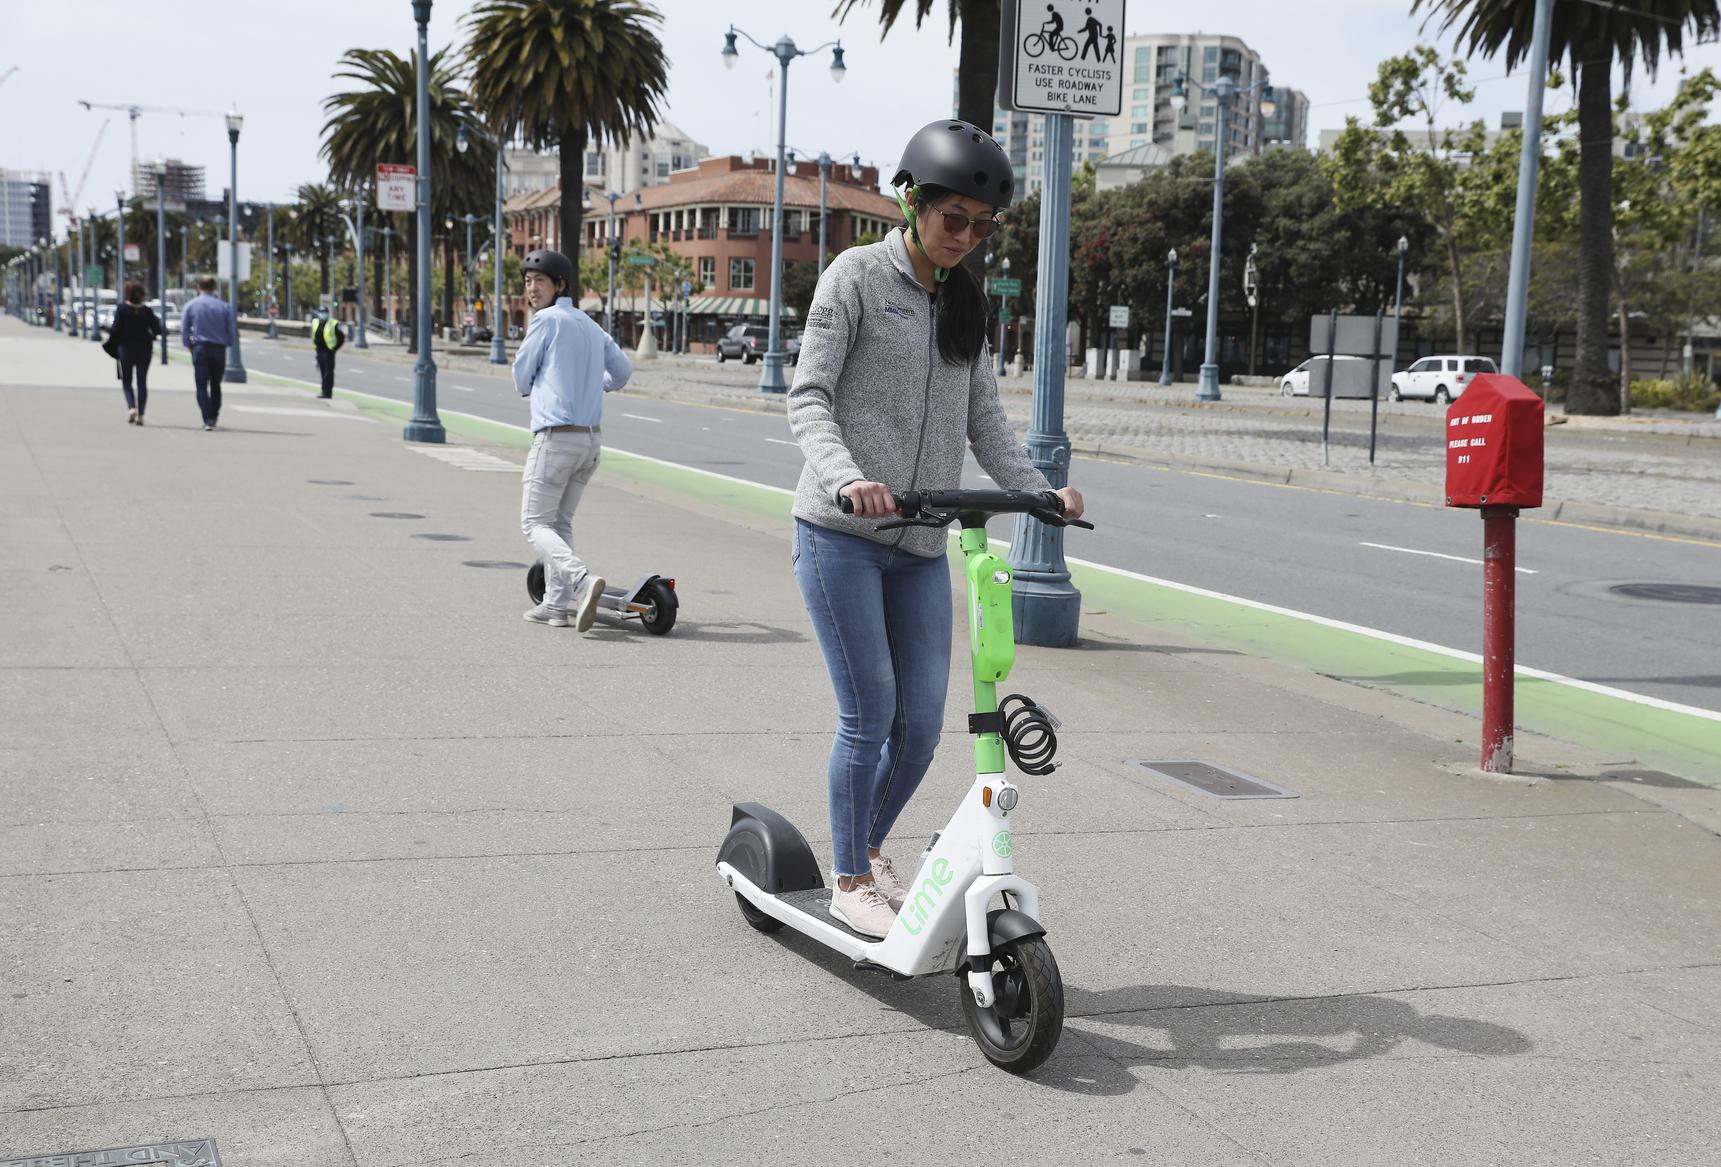 New tech aims to keep e-scooters off S.F. sidewalks. Will it work?